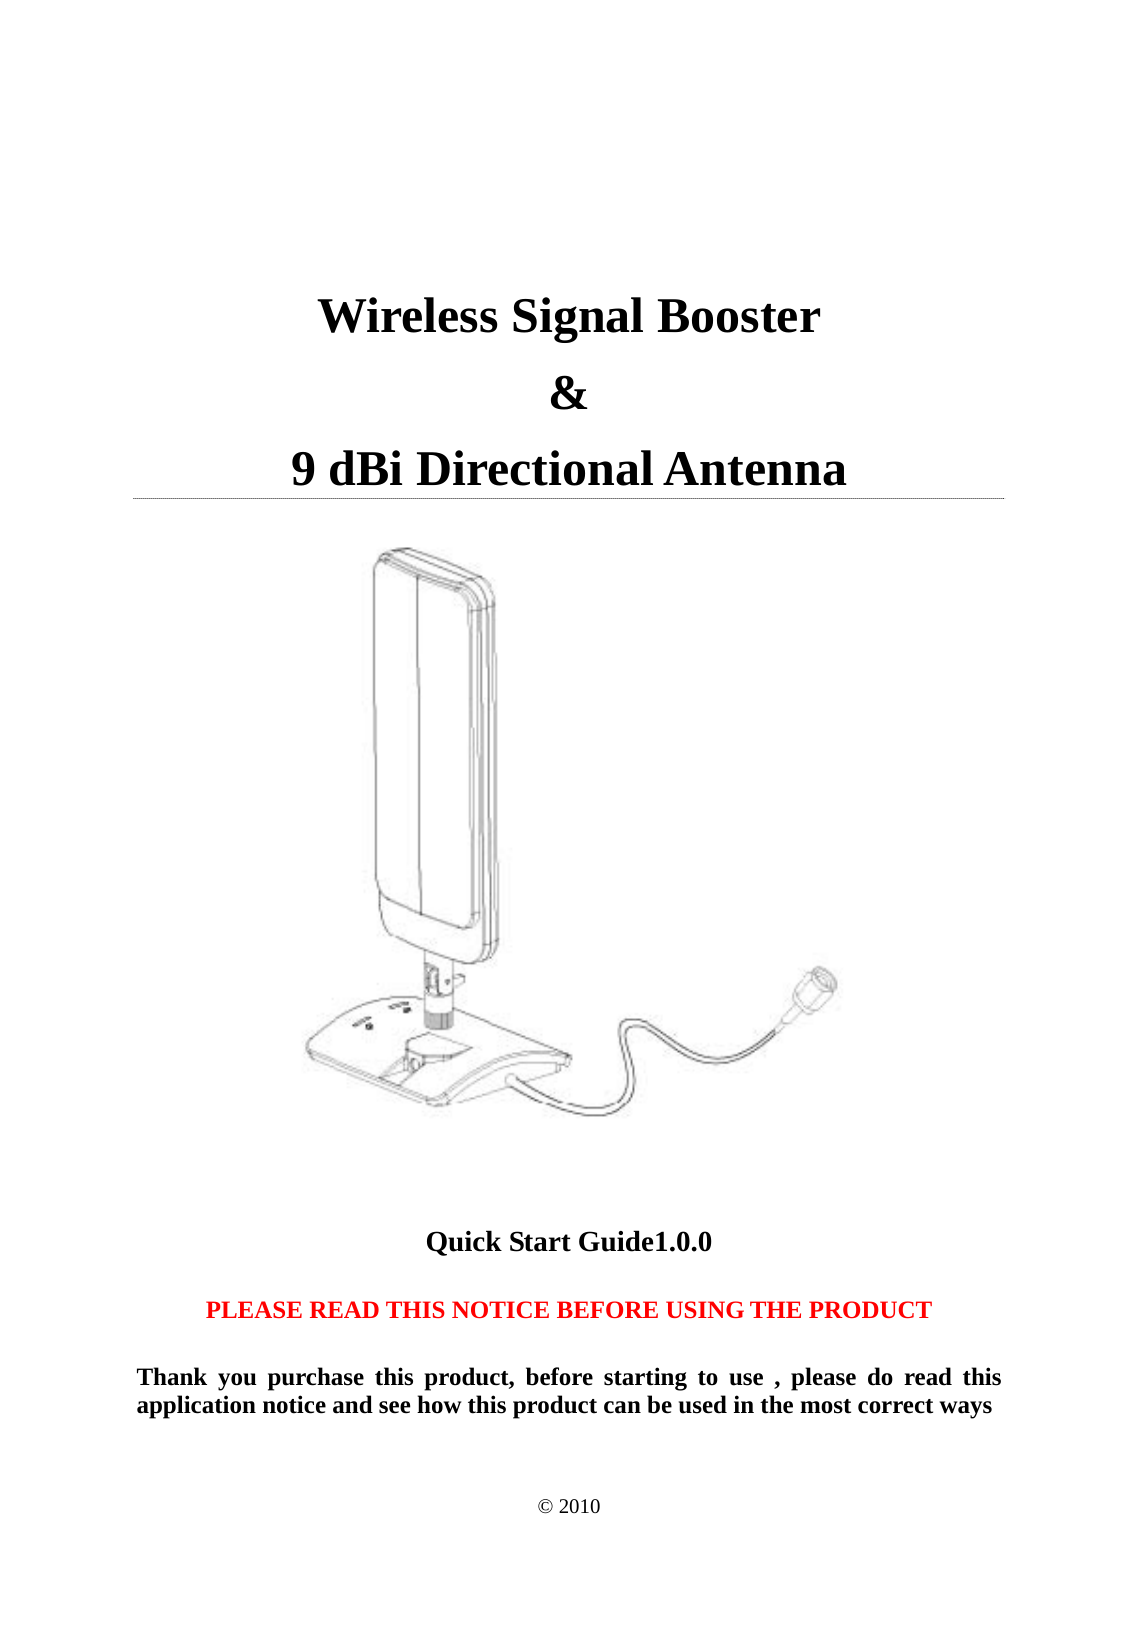 Wireless Signal Booster &amp; 9 dBi Directional Antenna  Quick Start Guide1.0.0 PLEASE READ THIS NOTICE BEFORE USING THE PRODUCT Thank you purchase this product, before starting to use , please do read this application notice and see how this product can be used in the most correct ways © 2010 